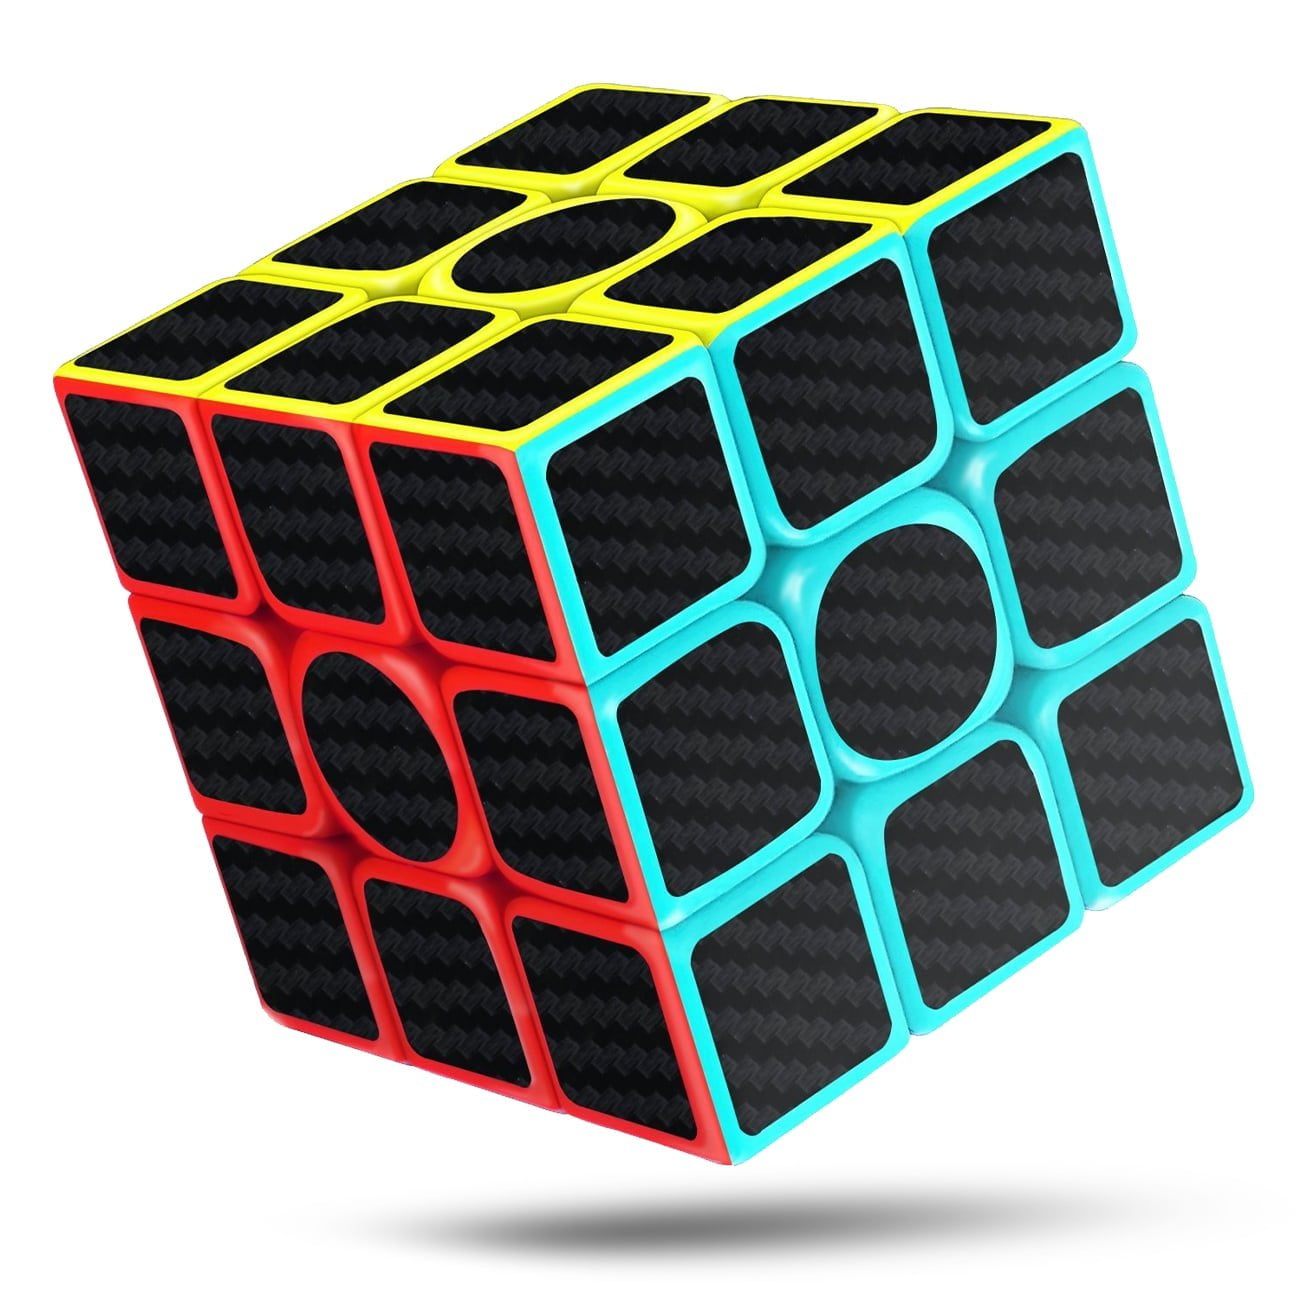 Rubik's Cube Professional Speed Cube 3x3x3 Magic Durable Smooth Puzzle Toys UK 